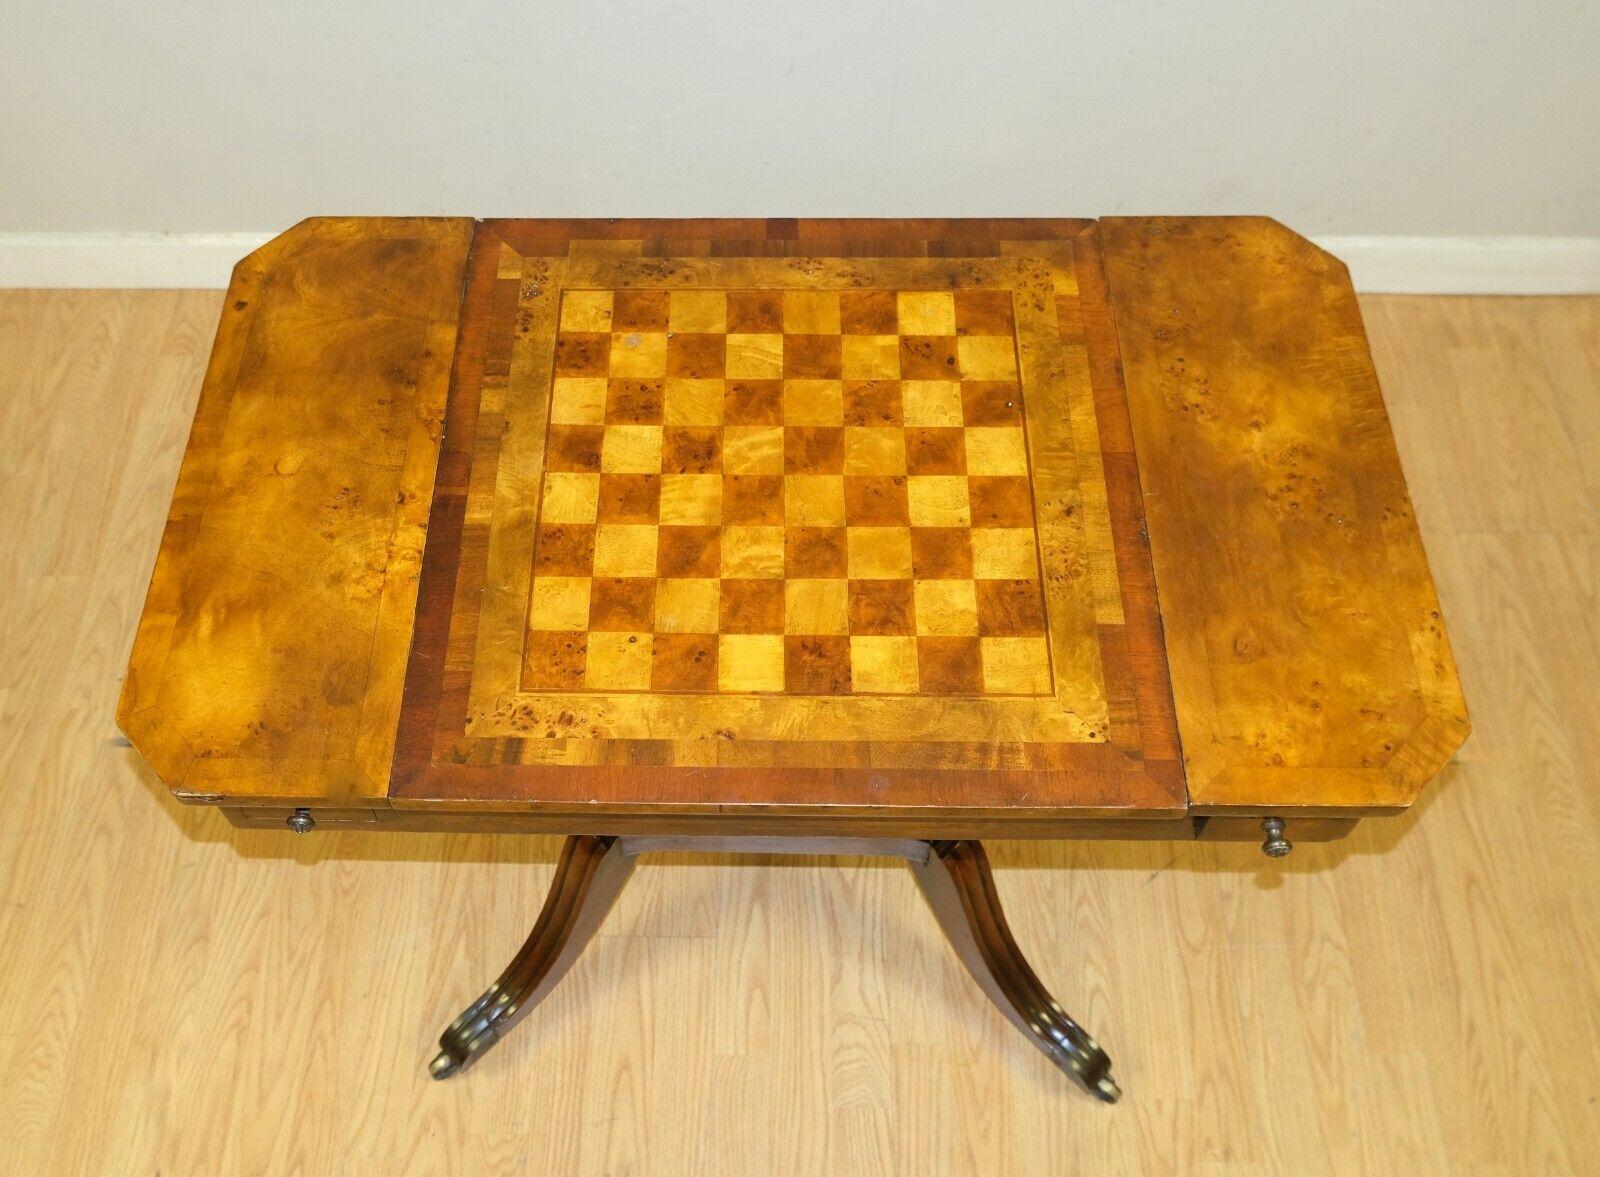 20th Century THEODORE ALEXANDER BURR WALNUT BROWN LEATHER GAME CHEDD TABLE REVERSiBLE TOP